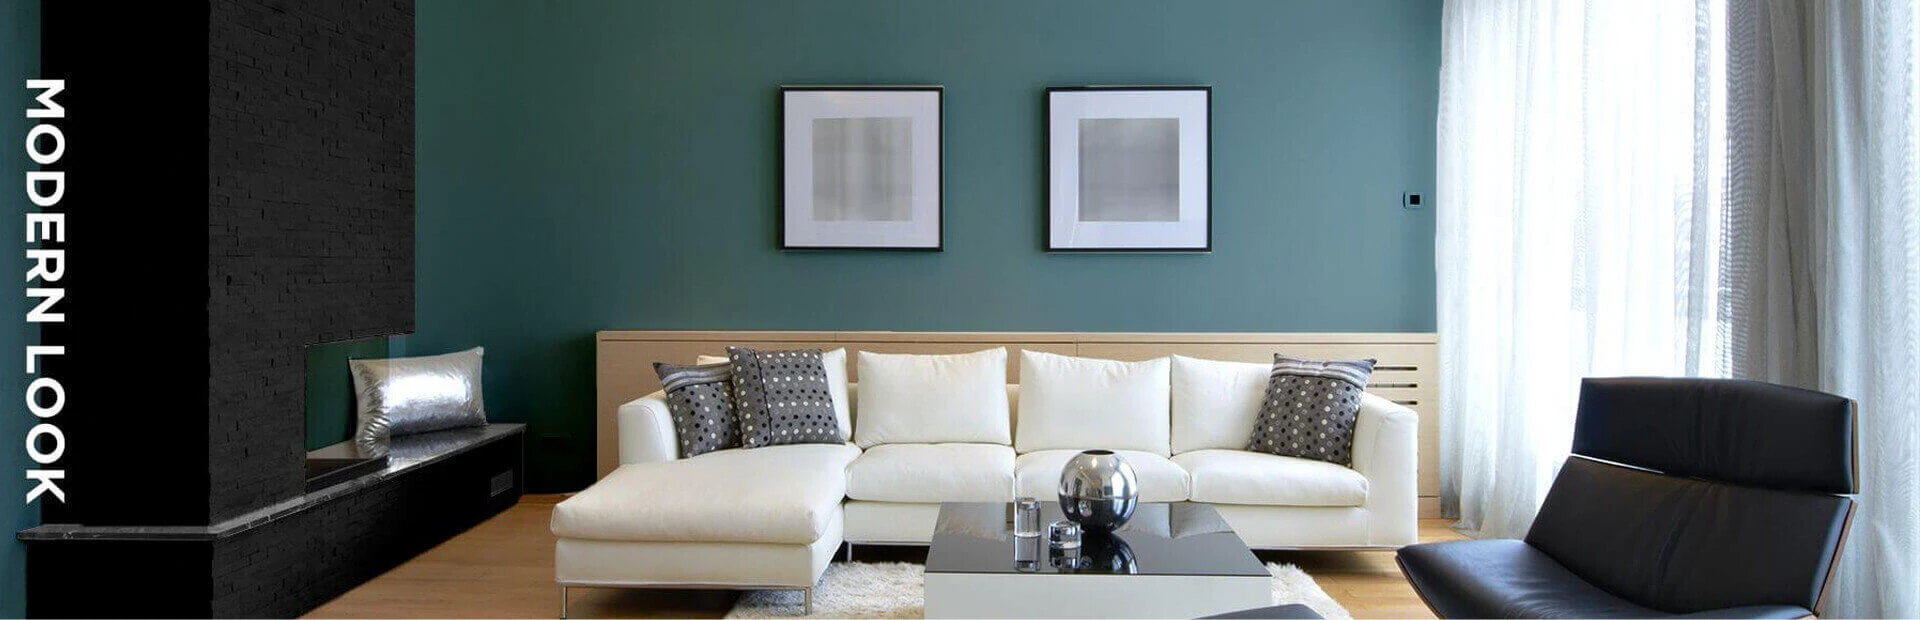 Living room colour scheme of green, black and beige.